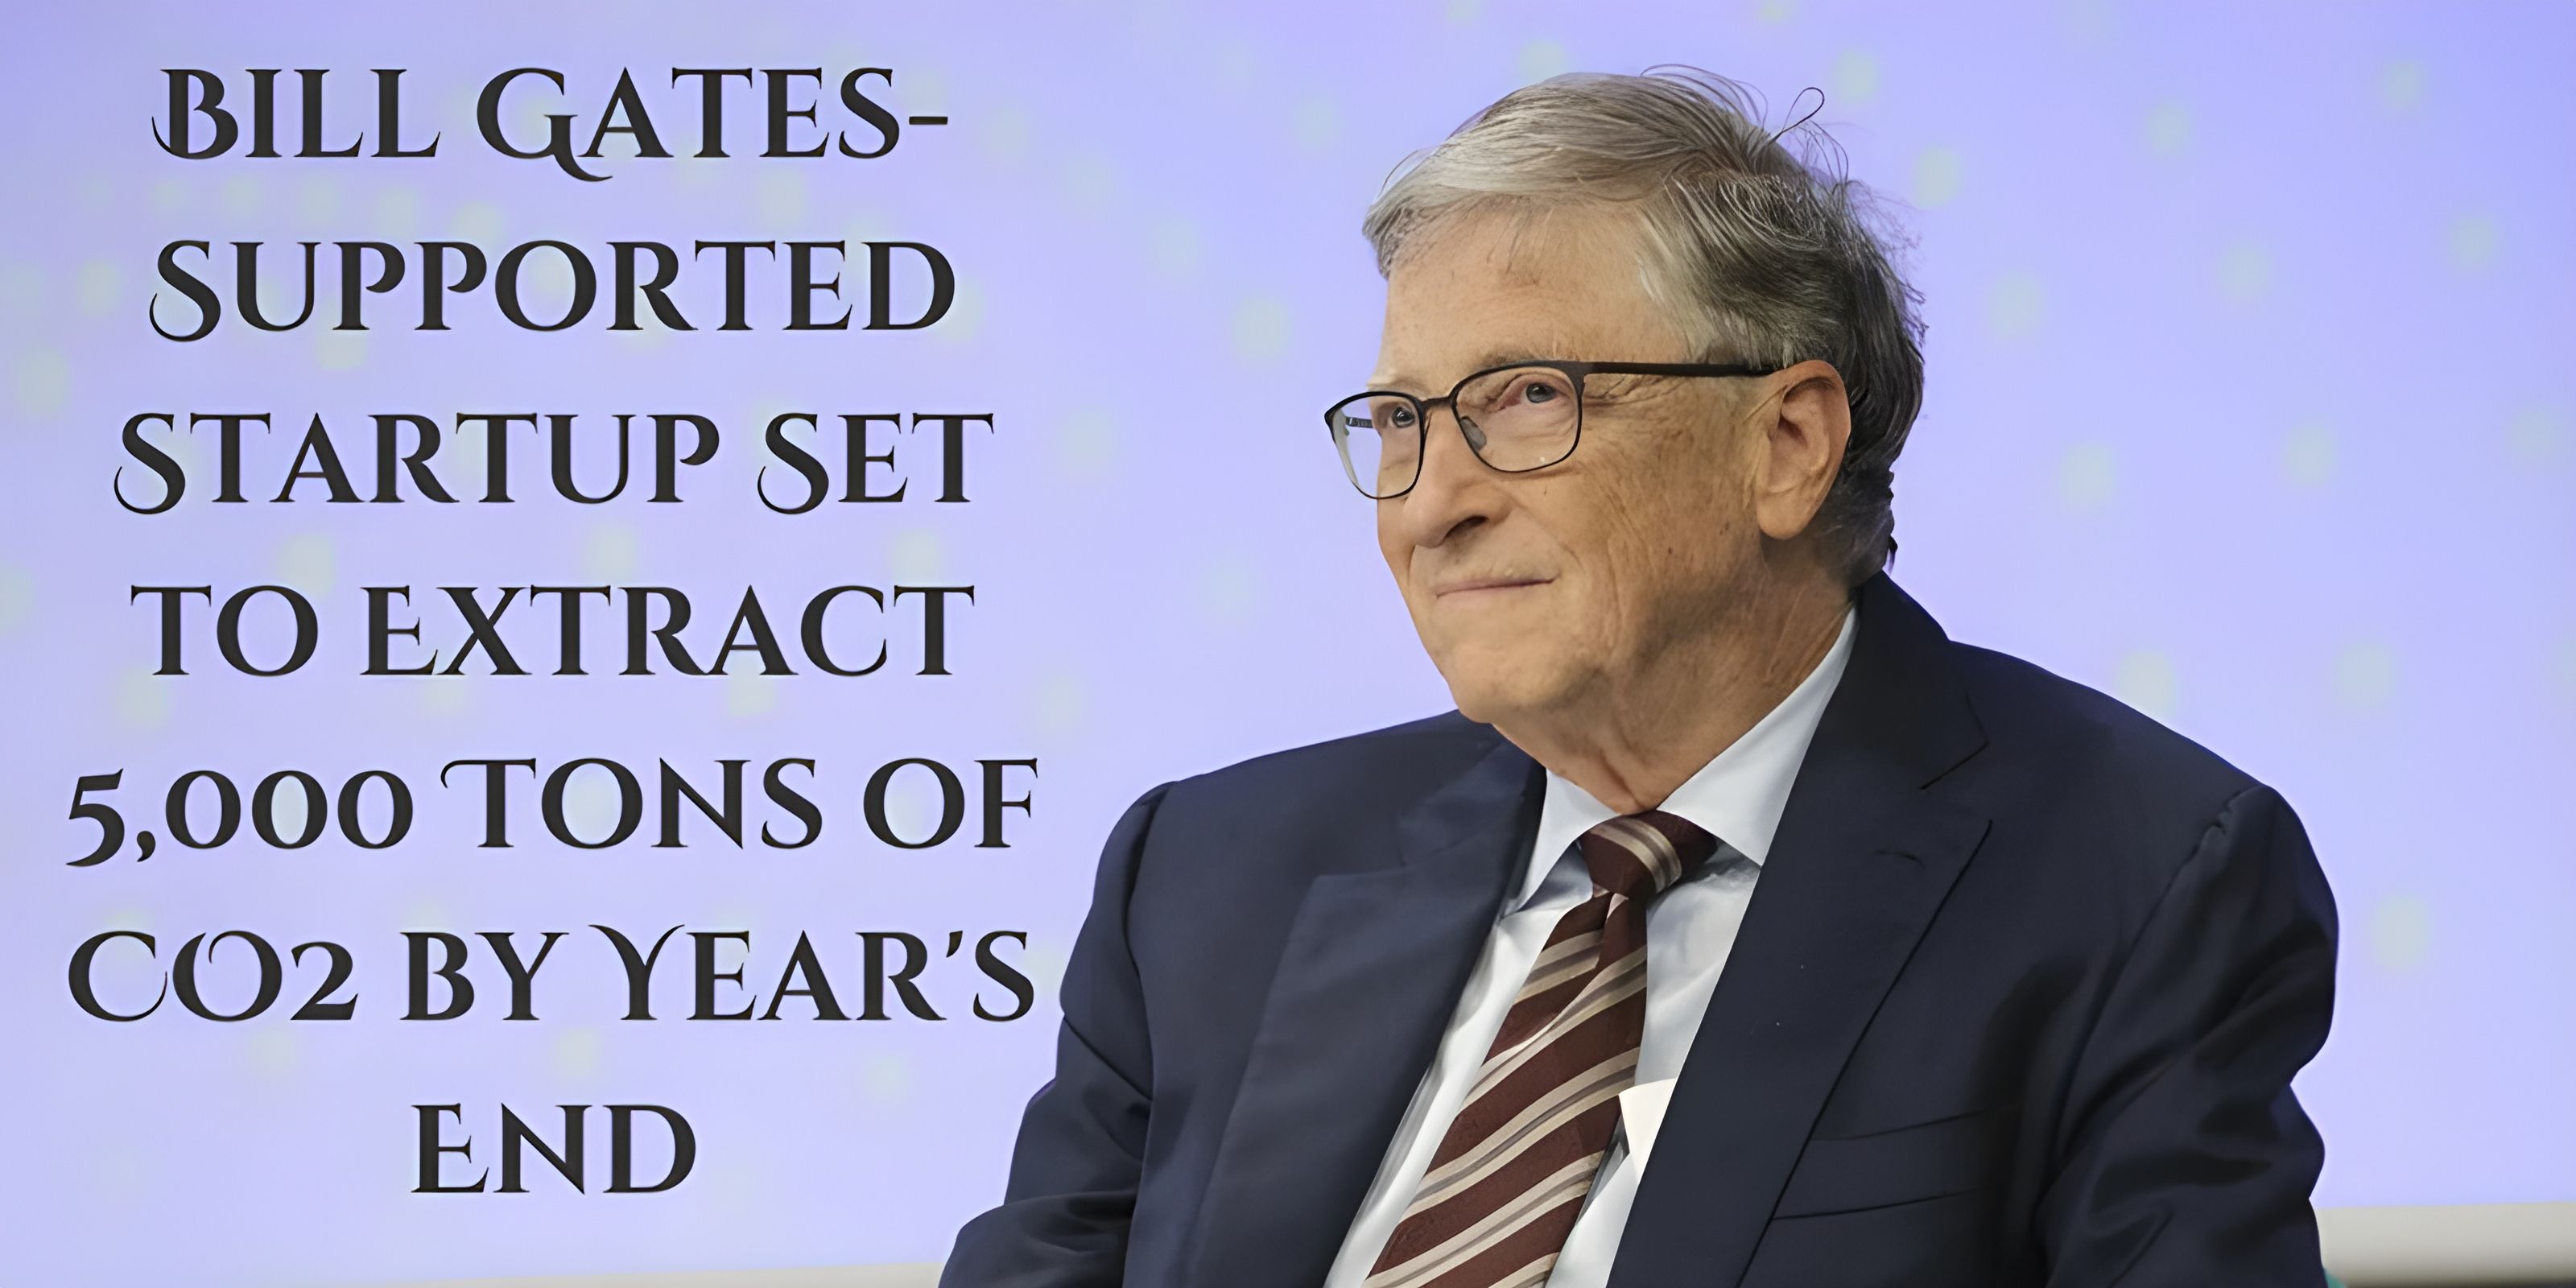 Bill Gates-Supported Startup Set to Extract 5,000 Tons of CO2 by Year's End